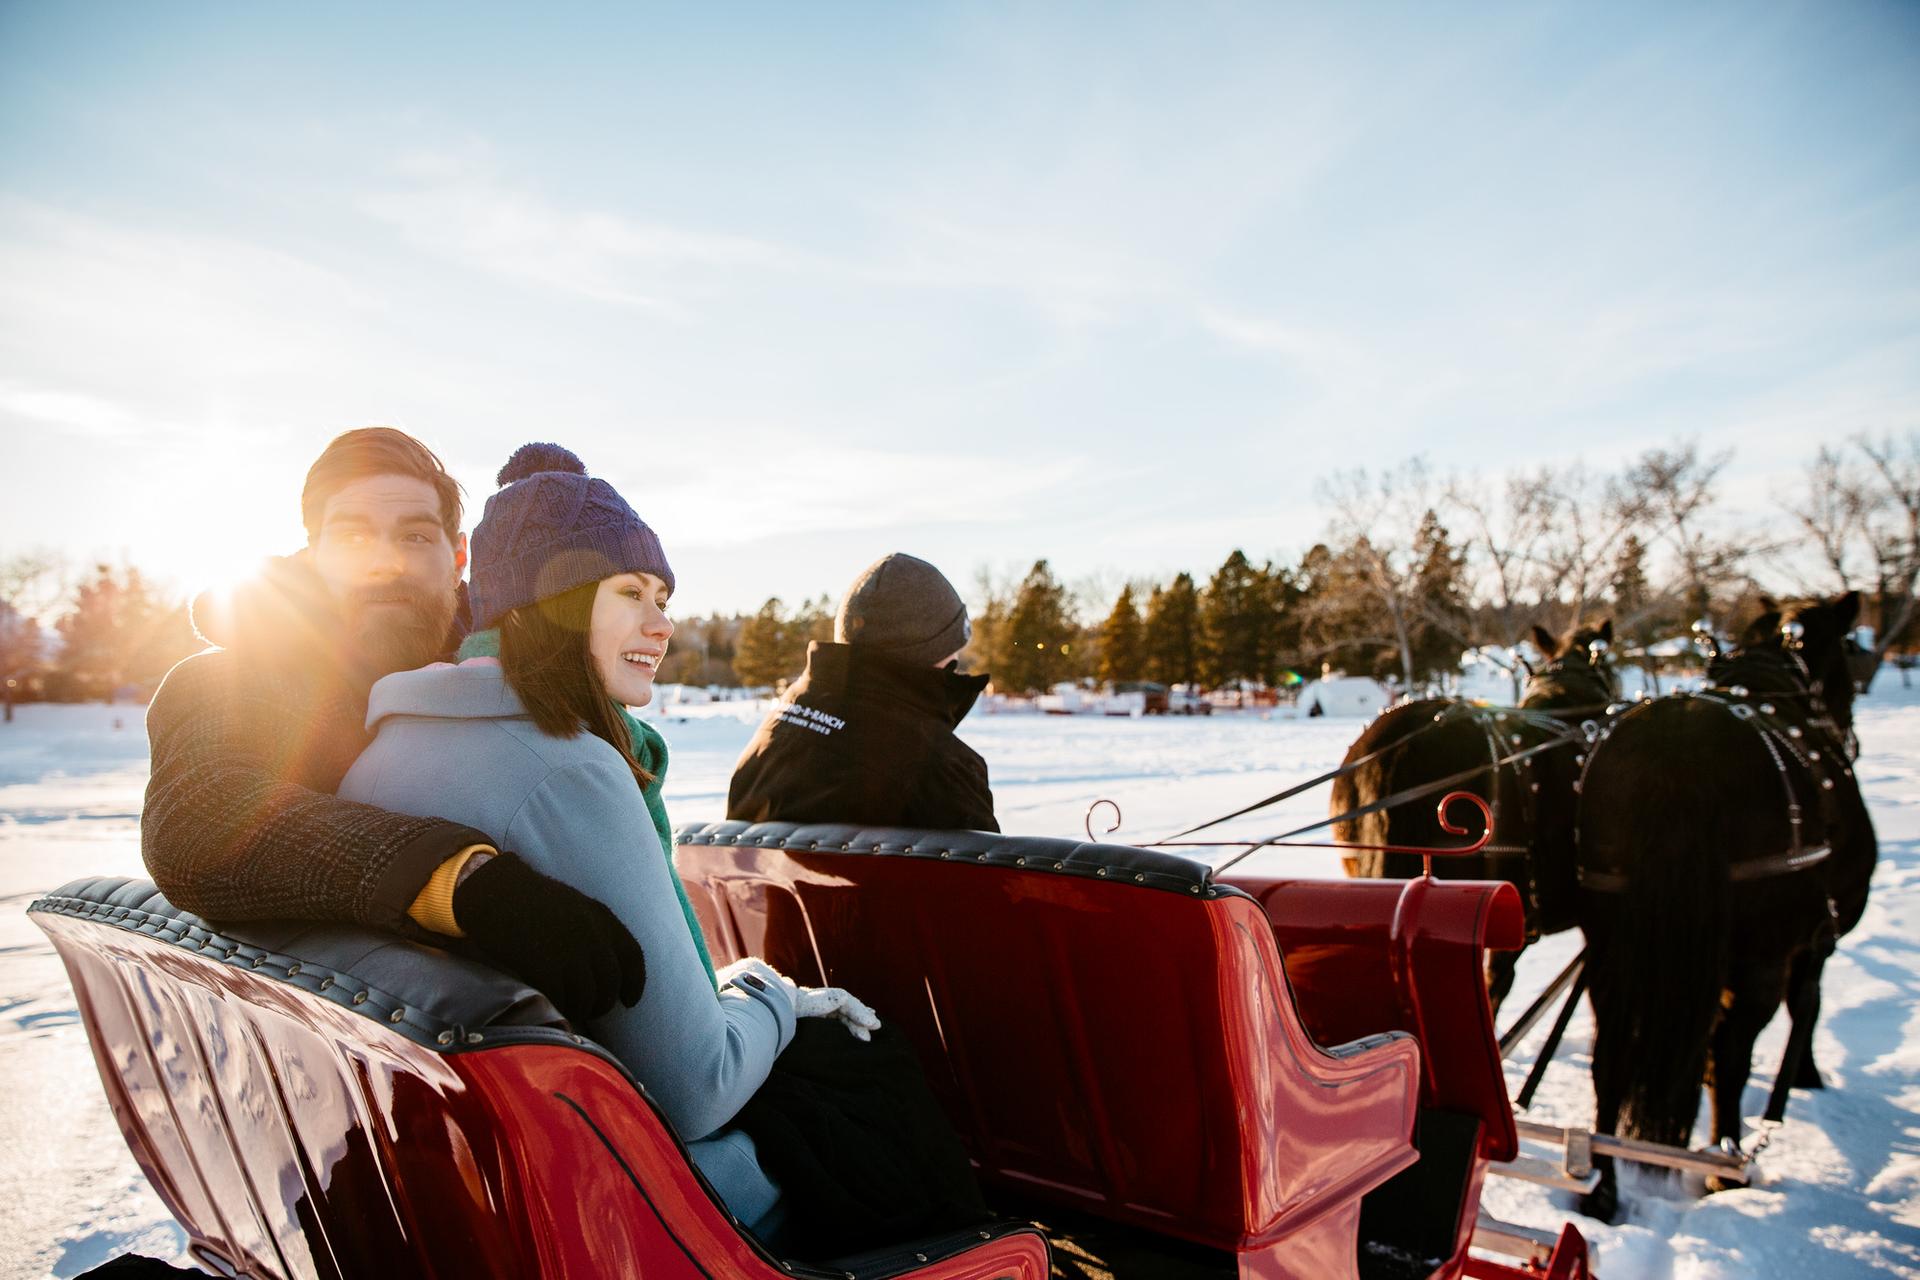 20 great Canadian winter activities and traditions